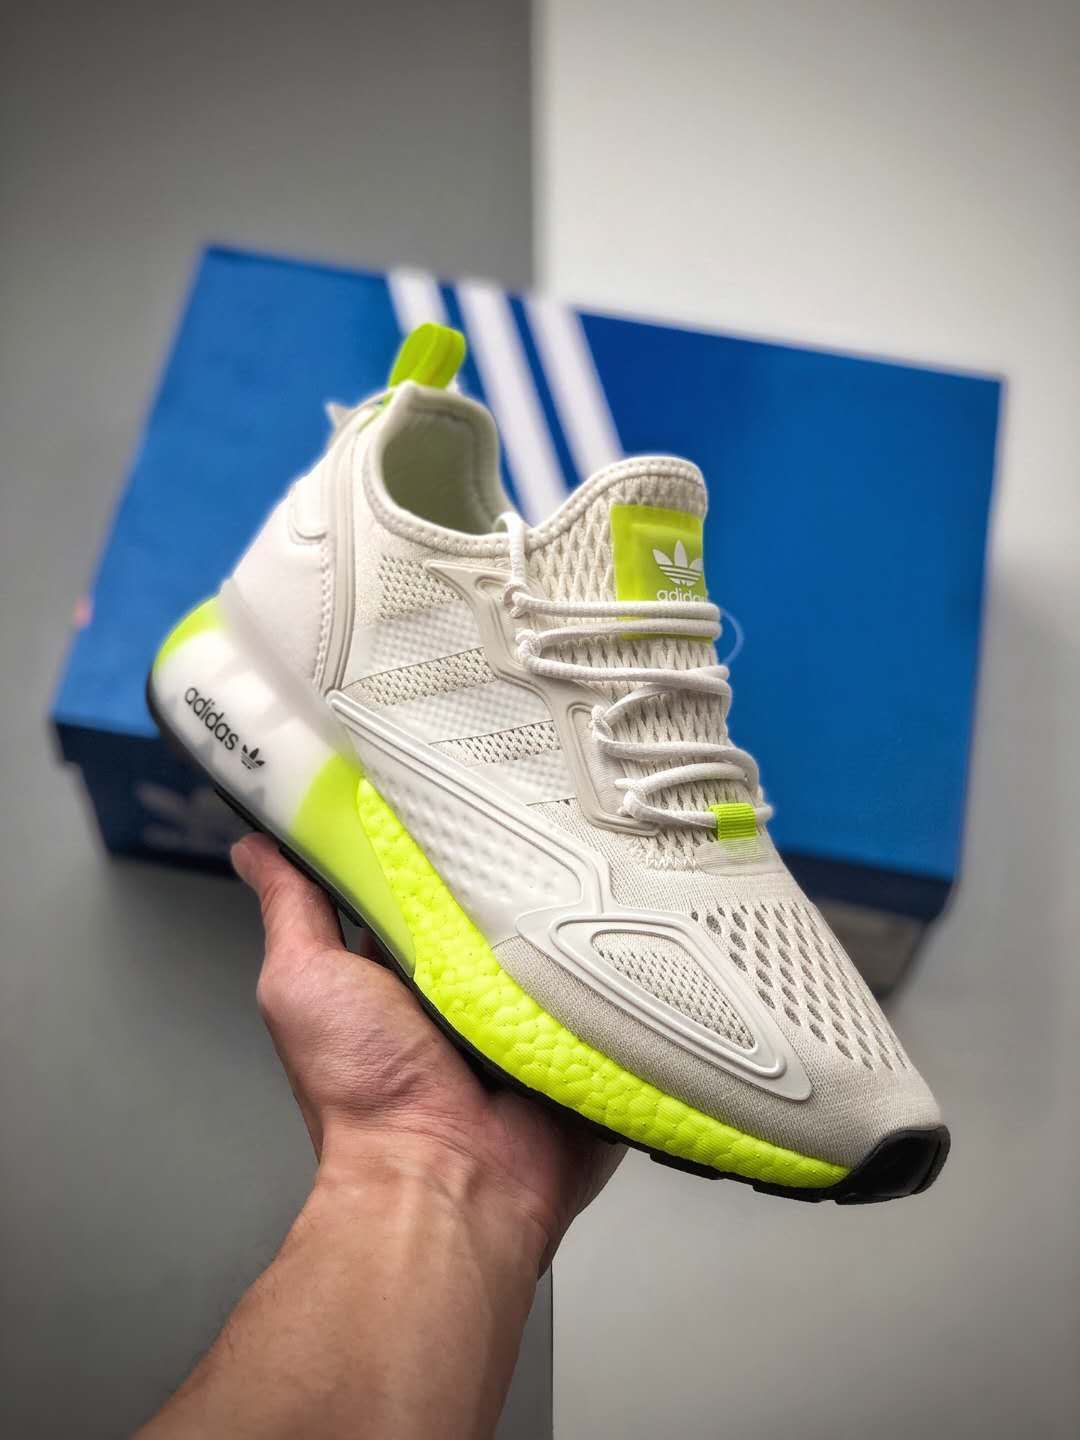 Adidas ZX 2K Boost 'White Solar Yellow' FW0480 - Stylish and Comfortable Footwear